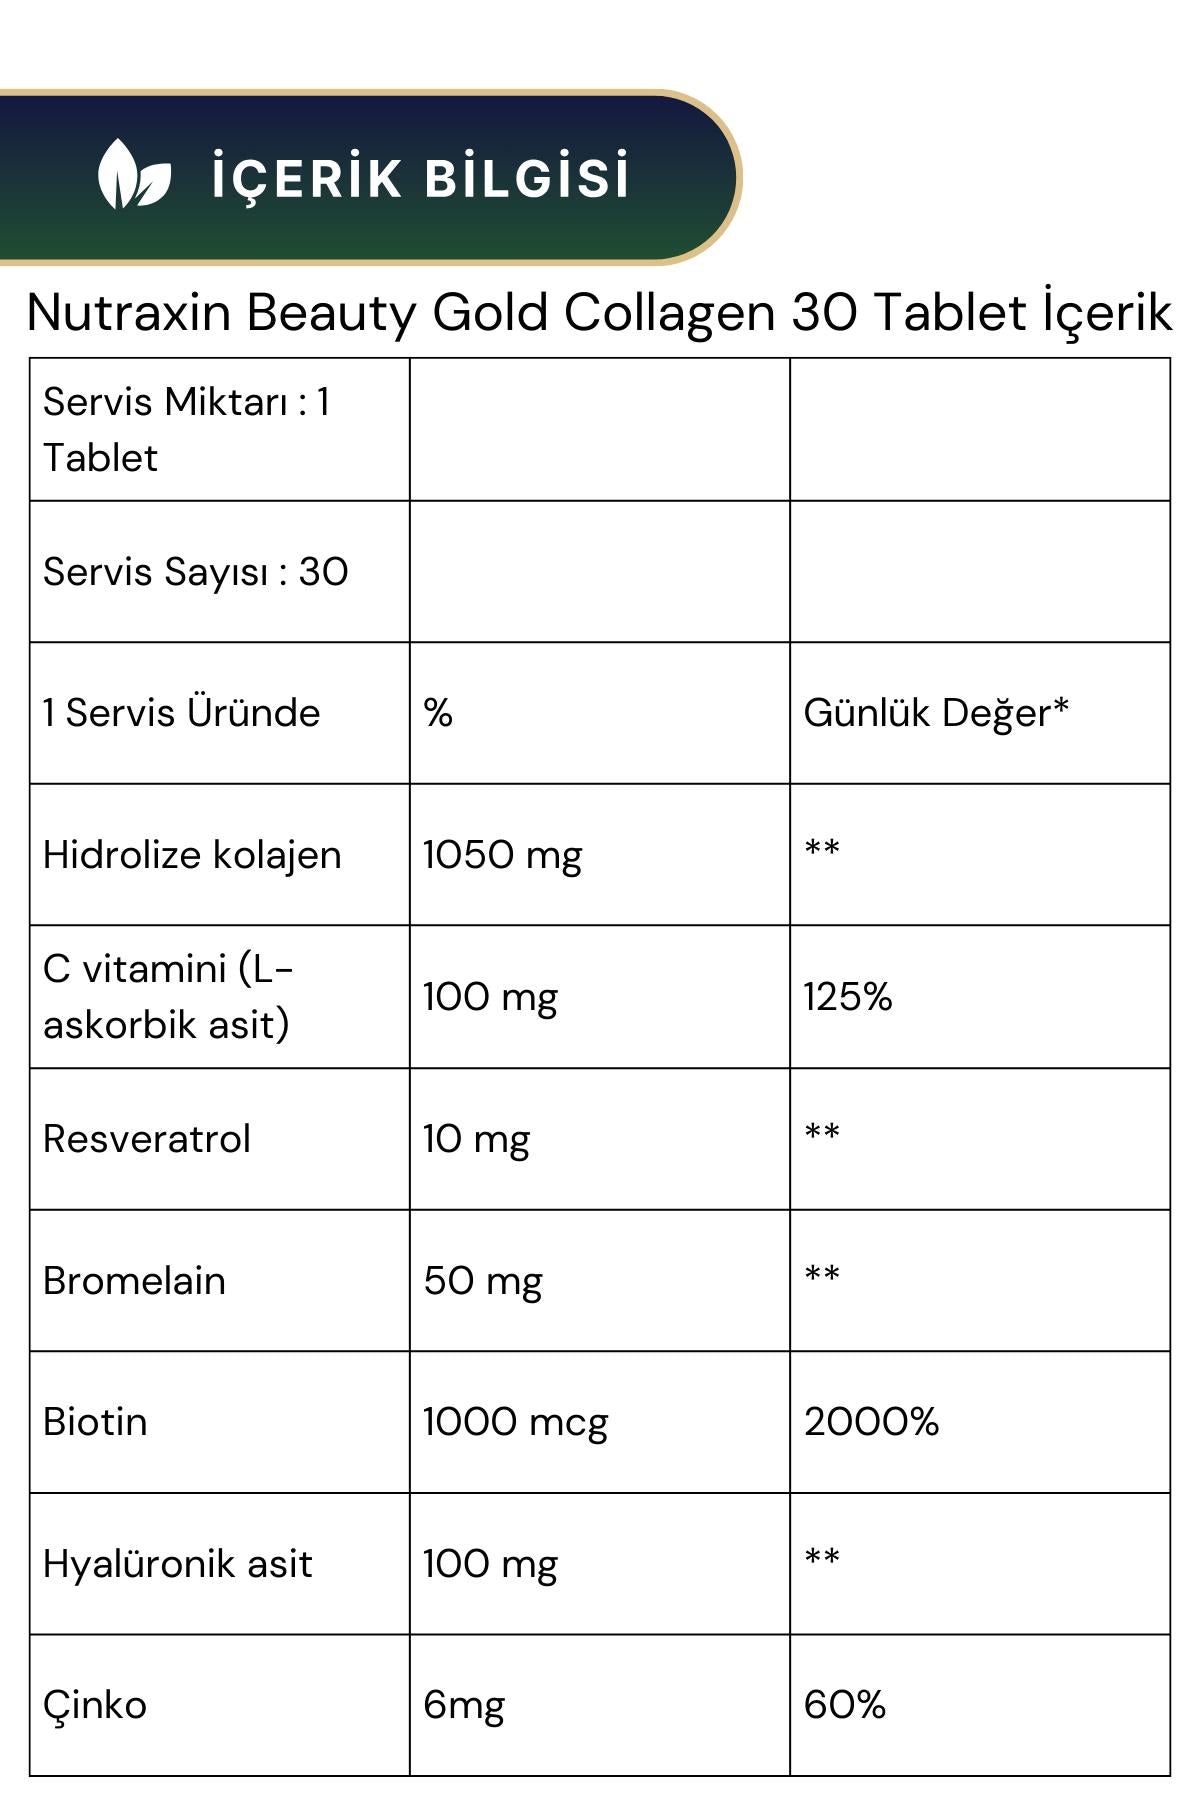 Nutraxin Cranberry 500 mg 60 Tablet &  Beauty Gold Collagen 30 Tablet